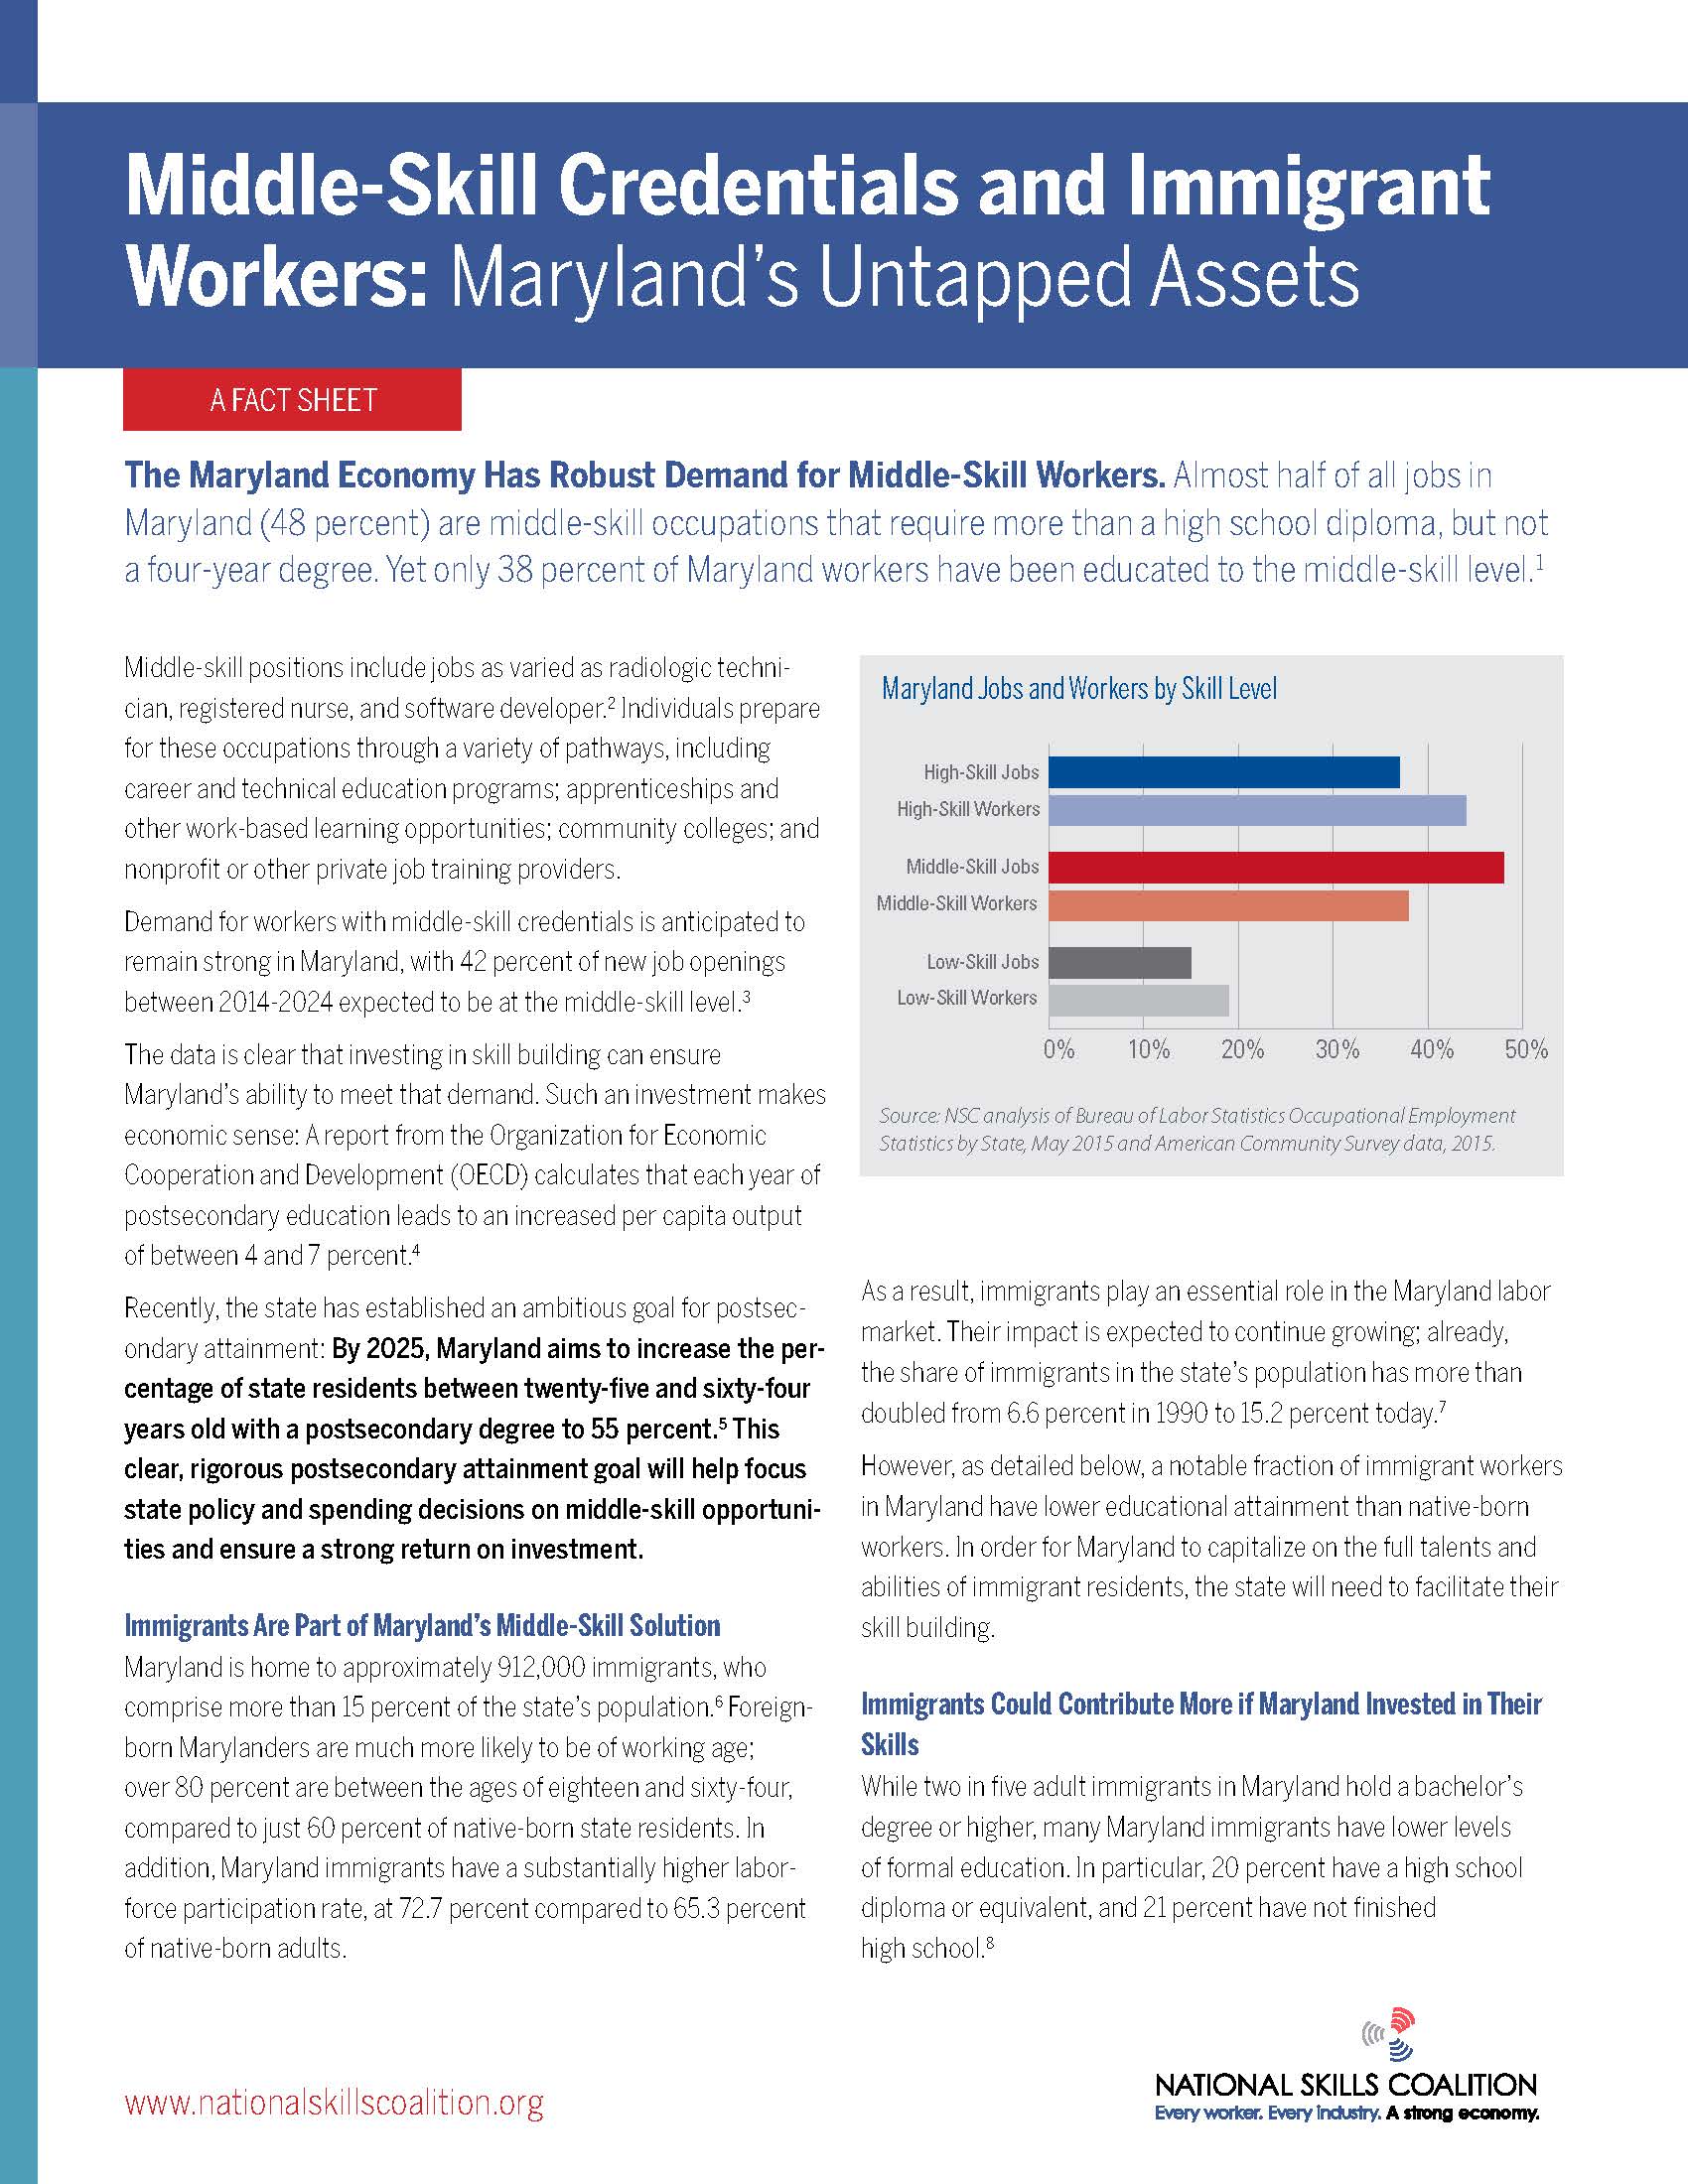 New Maryland and Michigan fact sheets: Immigrants can help meet demand for middle-skill workers